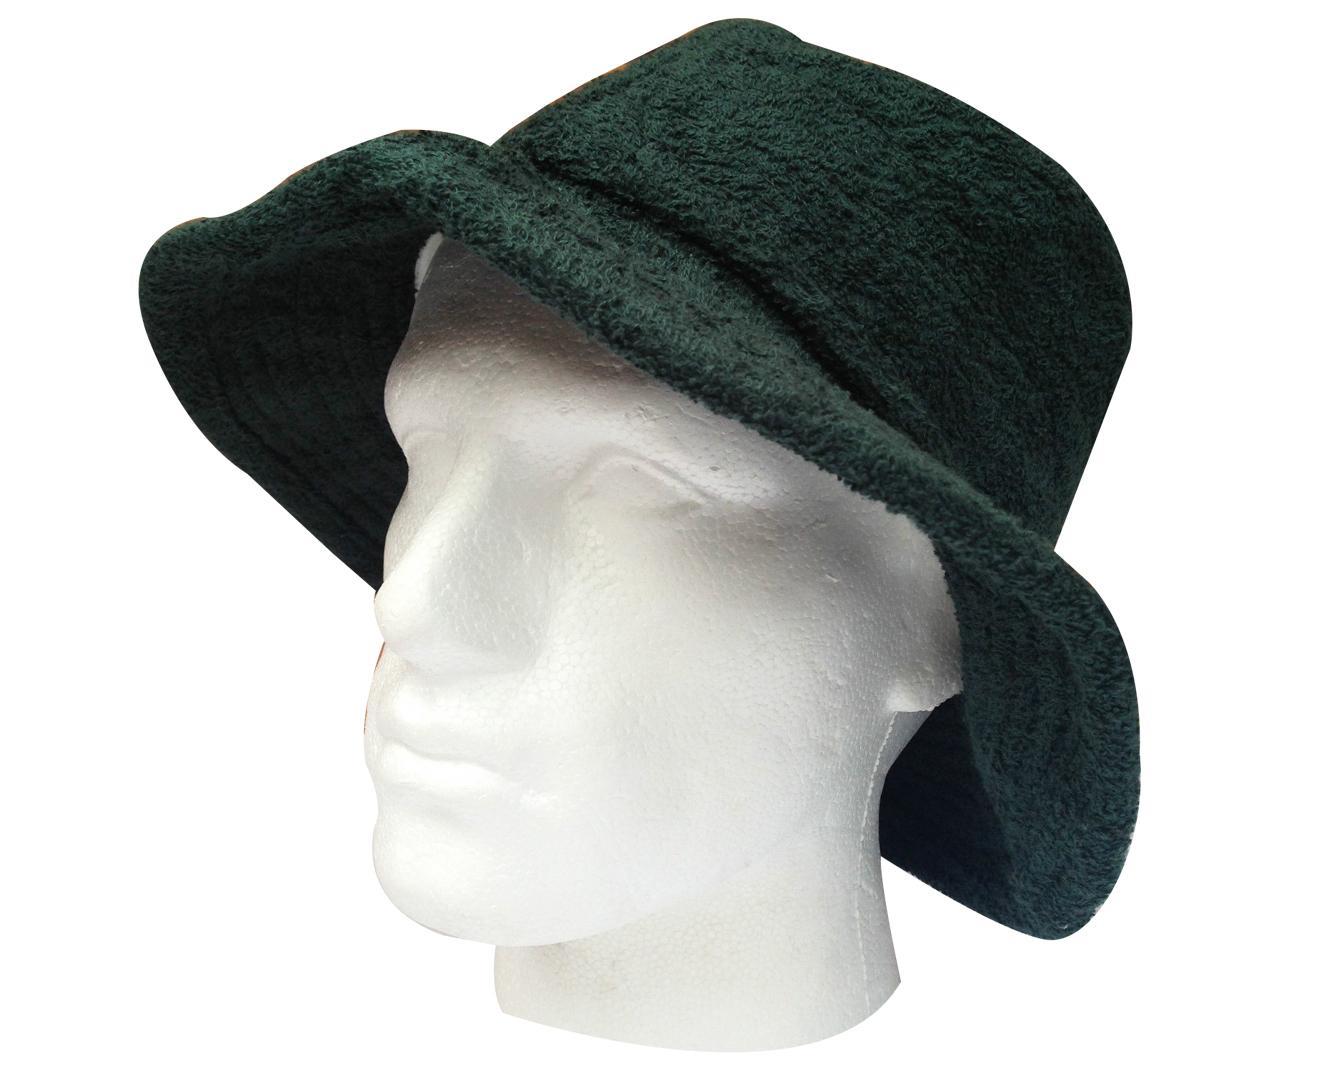 Terry Towelling BUCKET HAT Daggy Fishing Camping Lad Cap Retro 100% COTTON - Bottle Green - Large